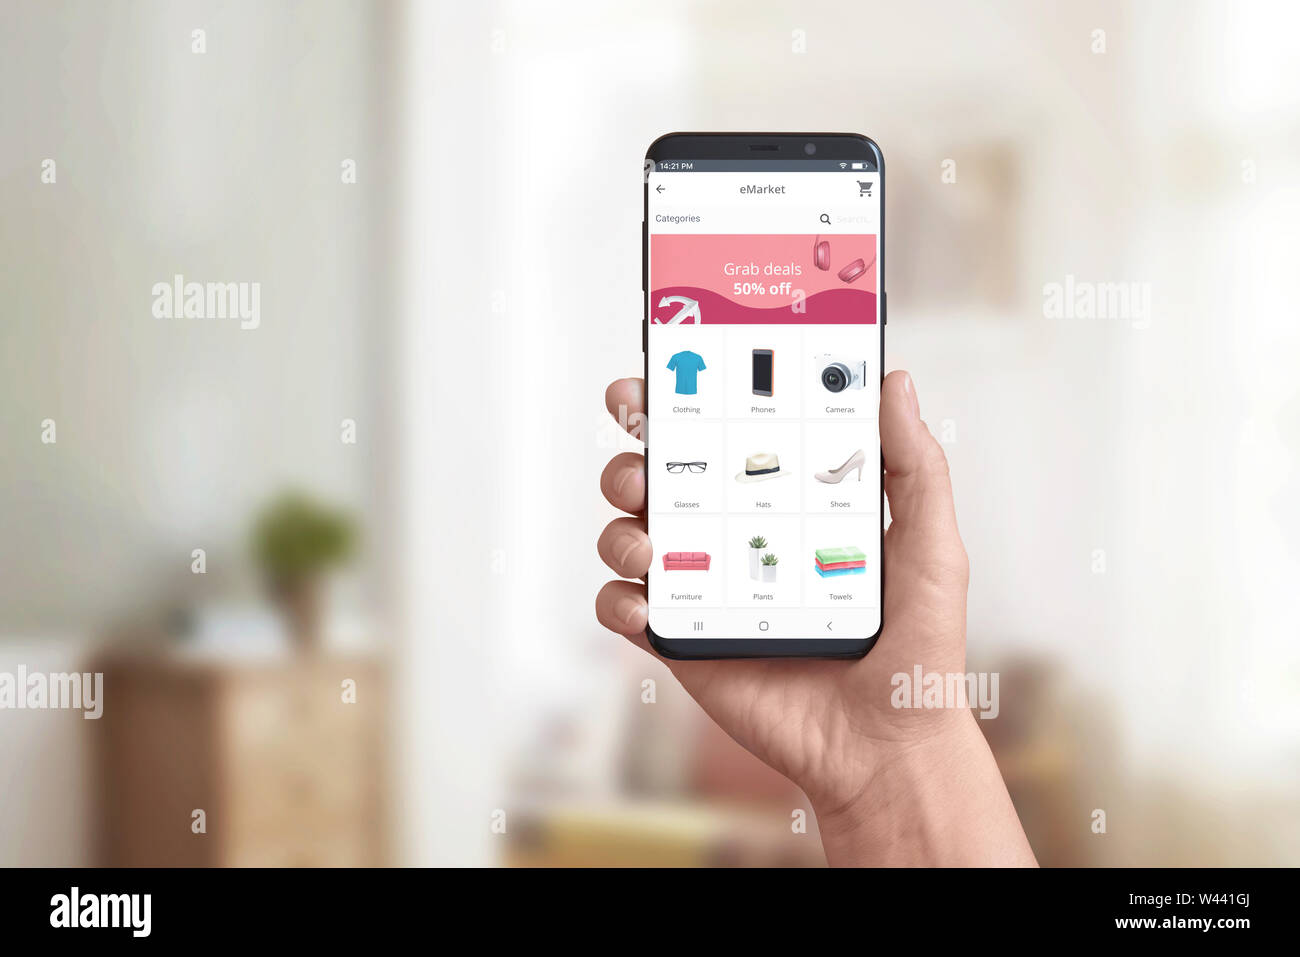 Hand showing online store app on a modern smart phone. Concept of online shopping and grab deals, discount marketing. Product categories and shopping Stock Photo